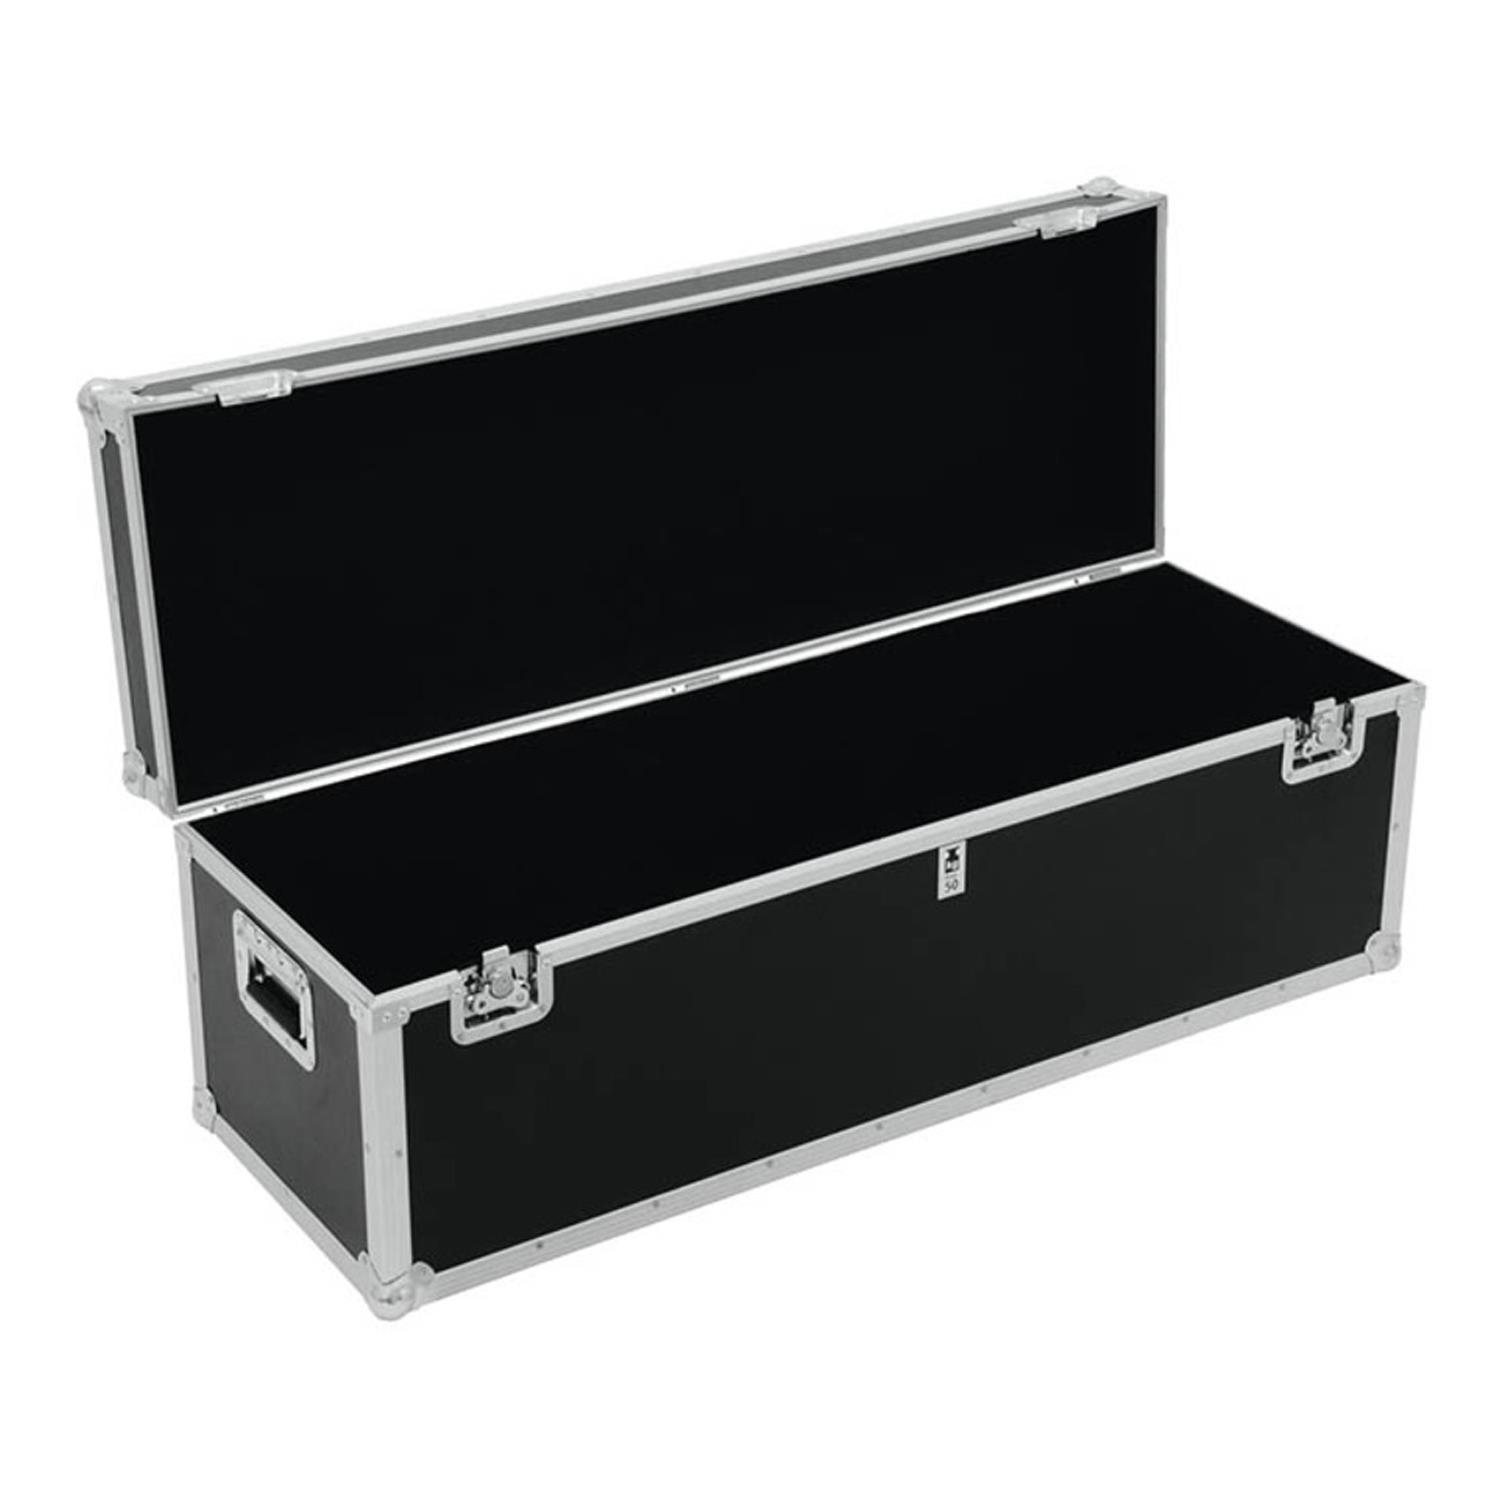 StageCore FC83 1195x400x423mm Stacking Flight Case - DY Pro Audio